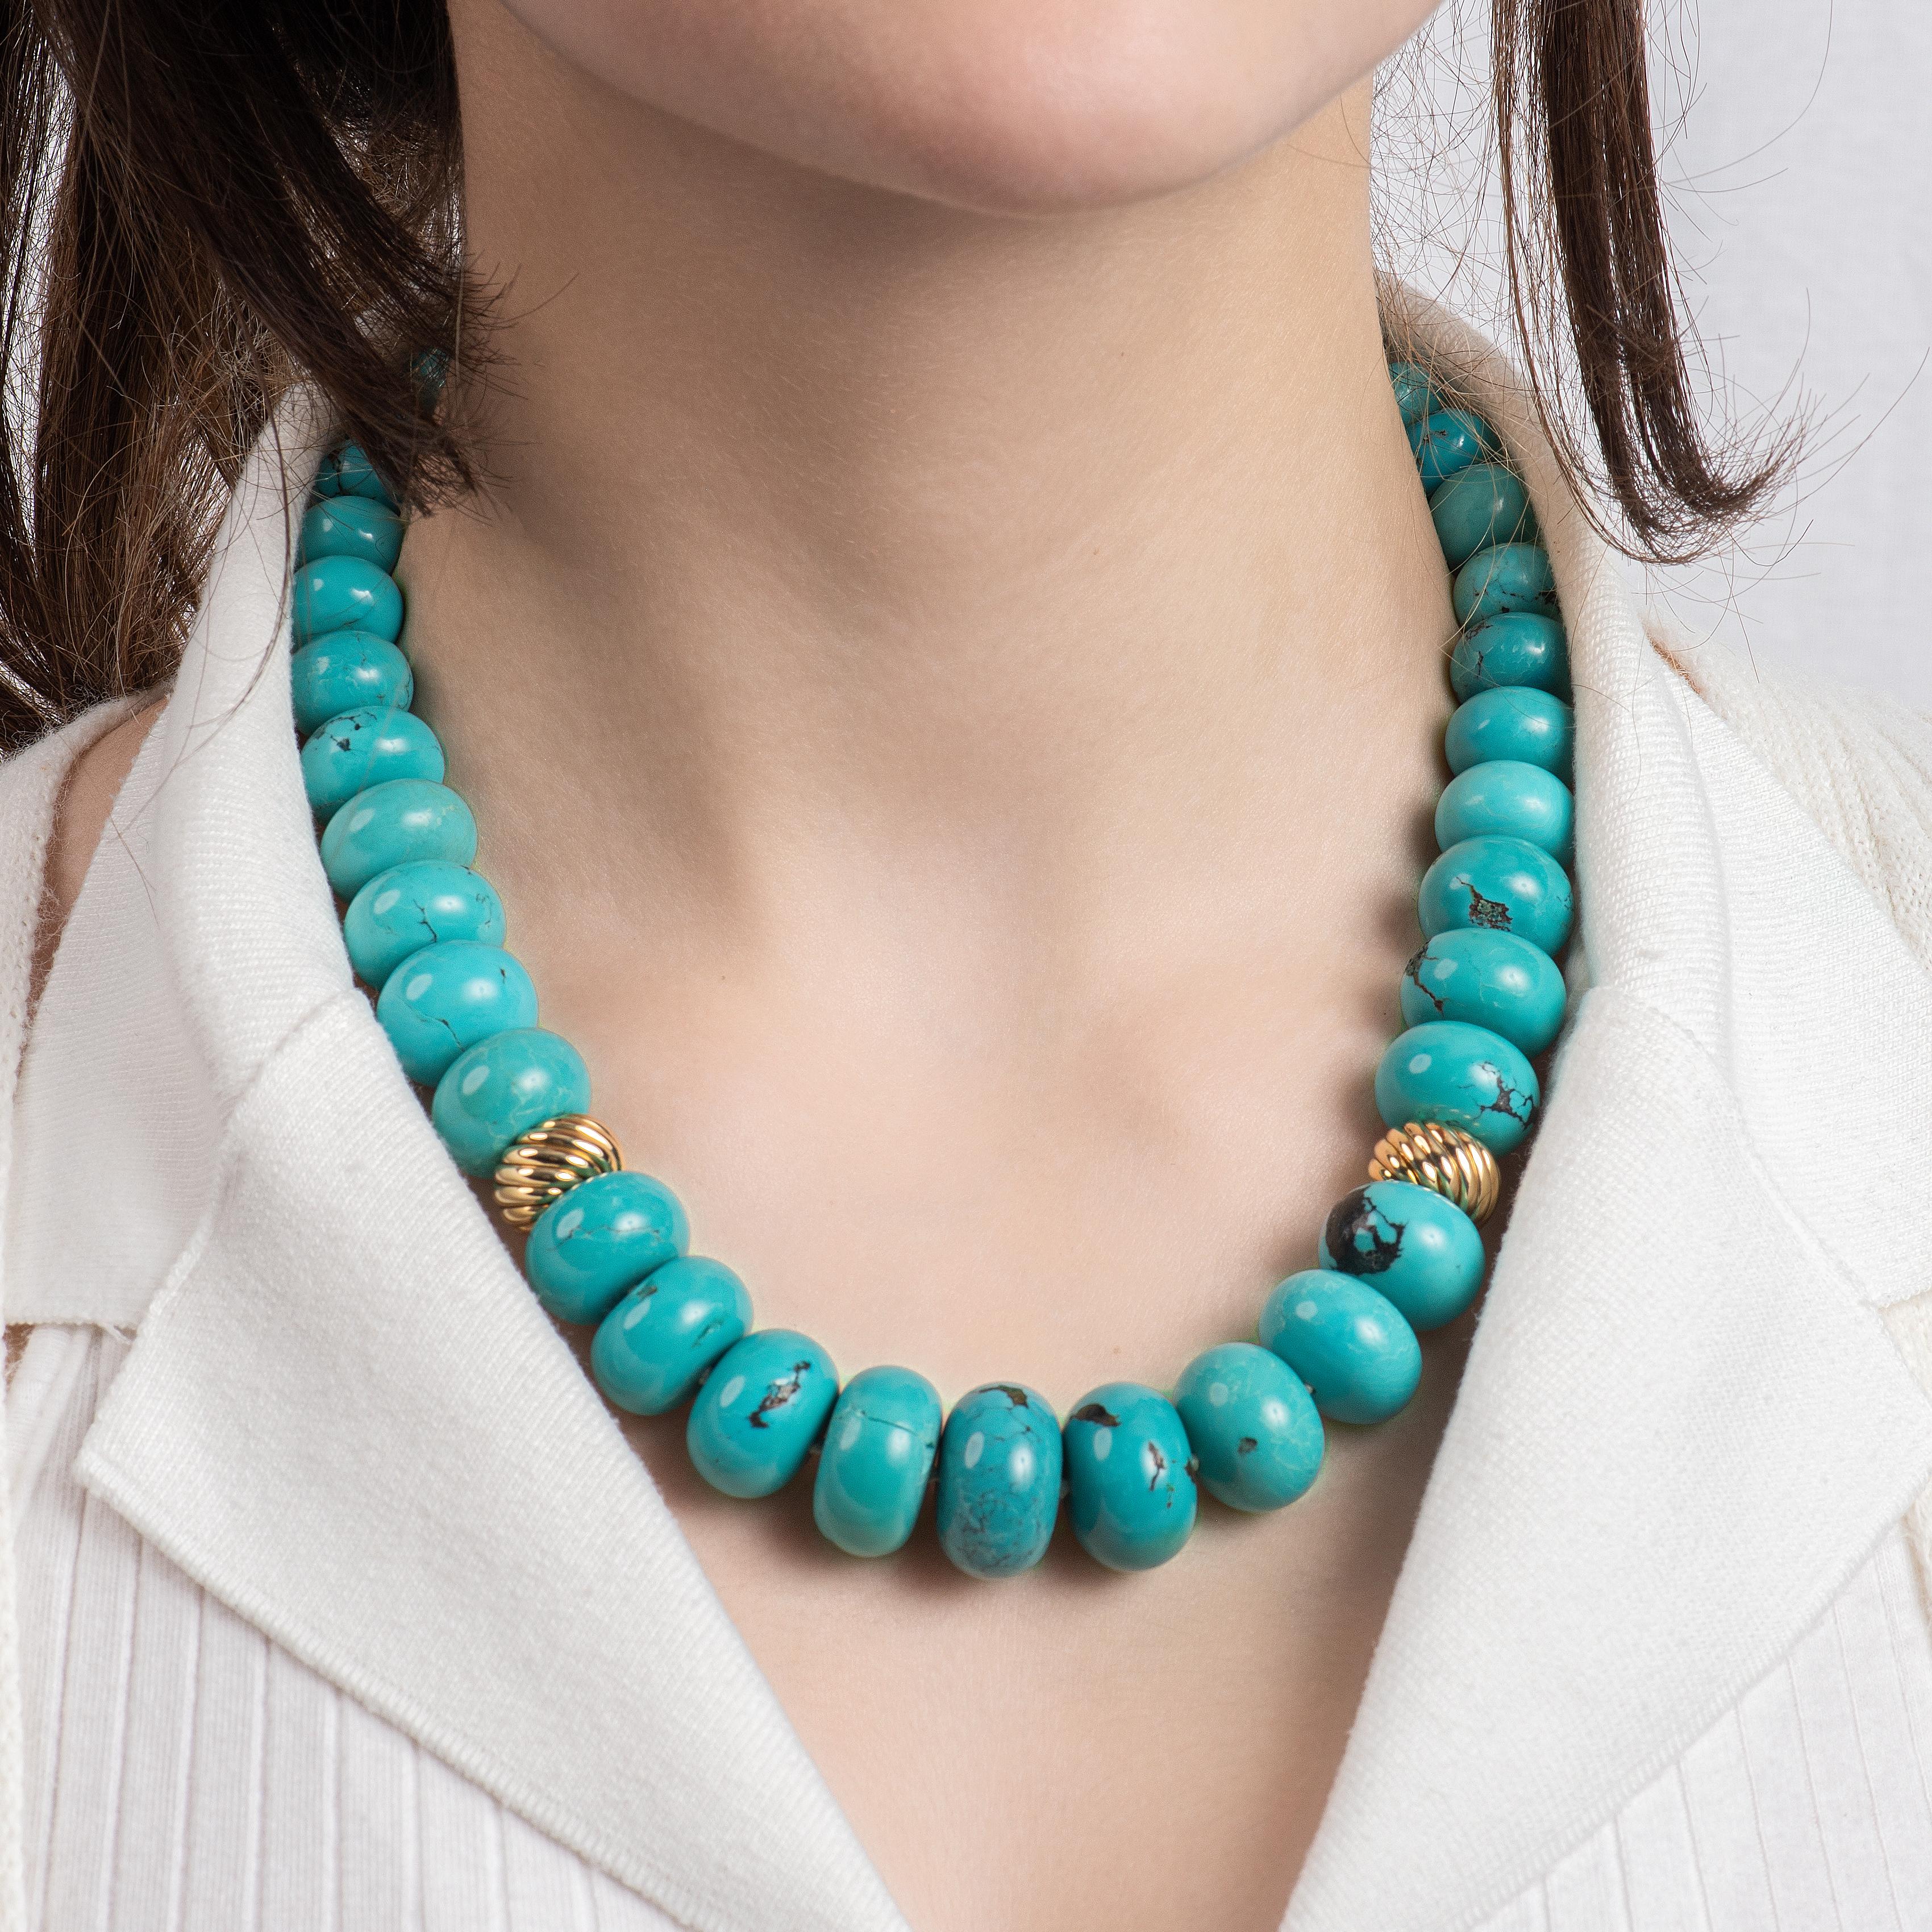 This incredible David Yurman Turquoise bead necklace features 41 turquoise beads, with 2 18kt yellow gold enhancers in the middle and a beautiful gold clasp. This piece is perfect for lovers of bold, chunky jewelry. It is approximately 18 inches